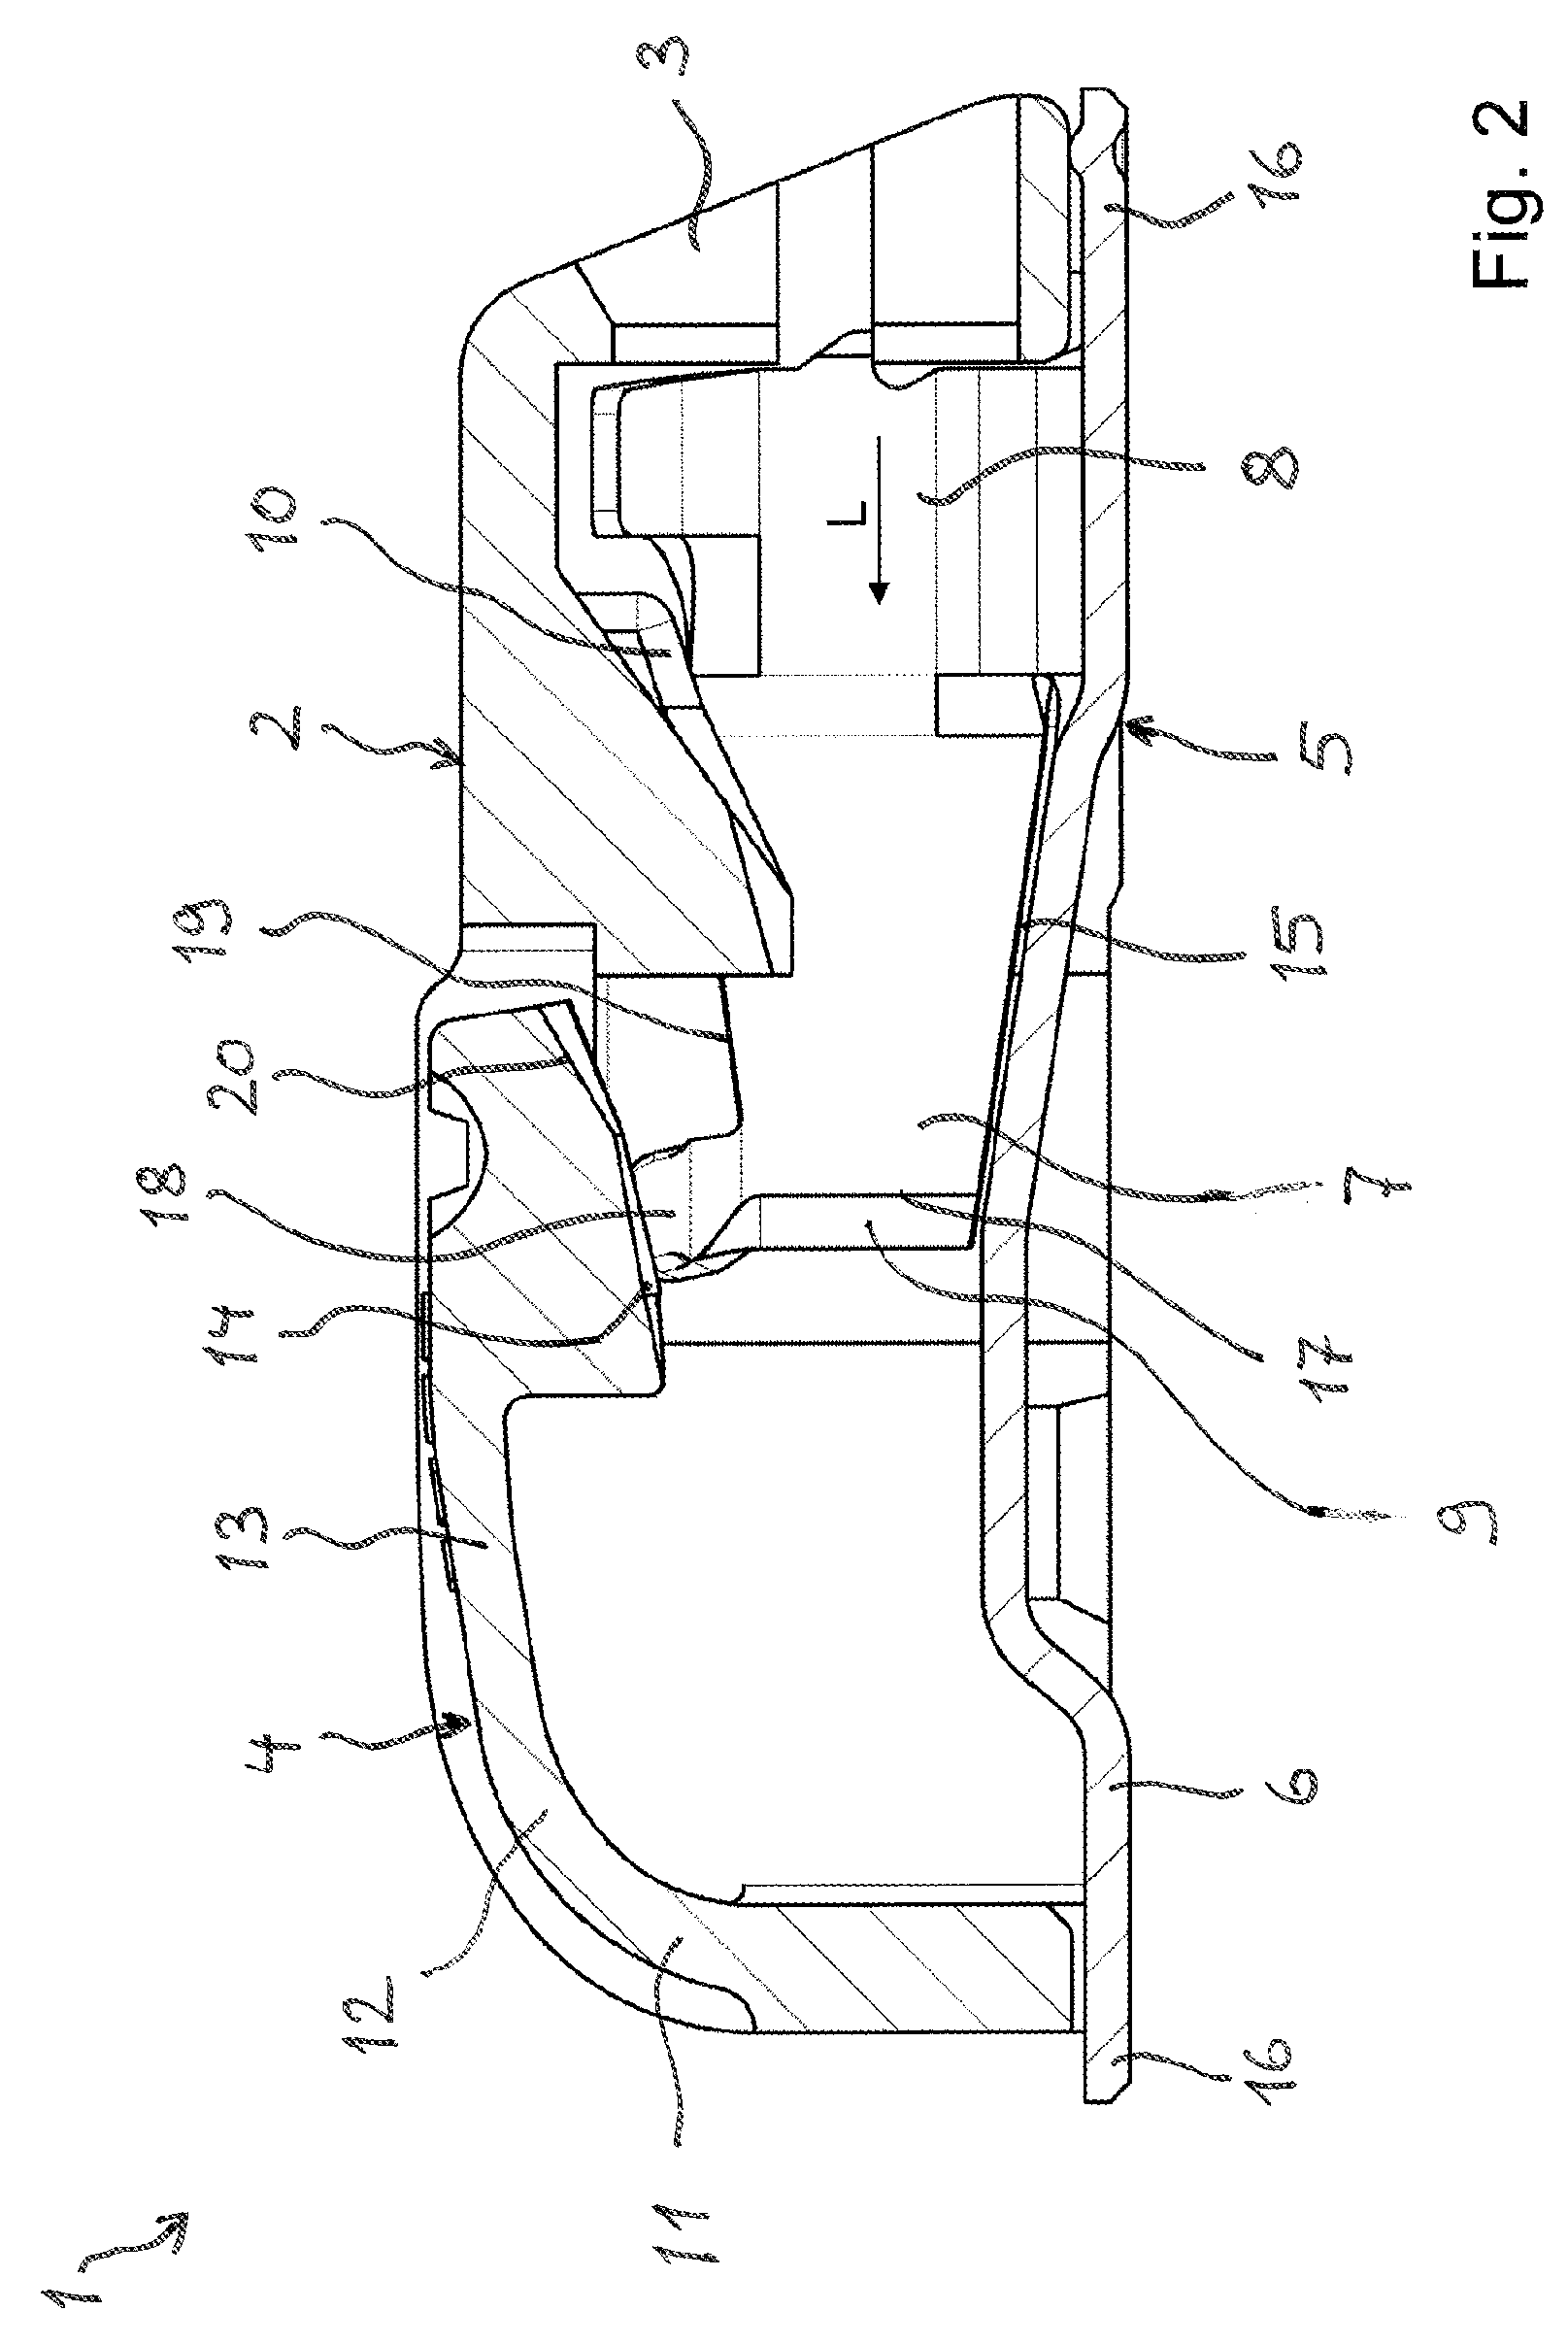 Conductor connection terminal having improved overload protection